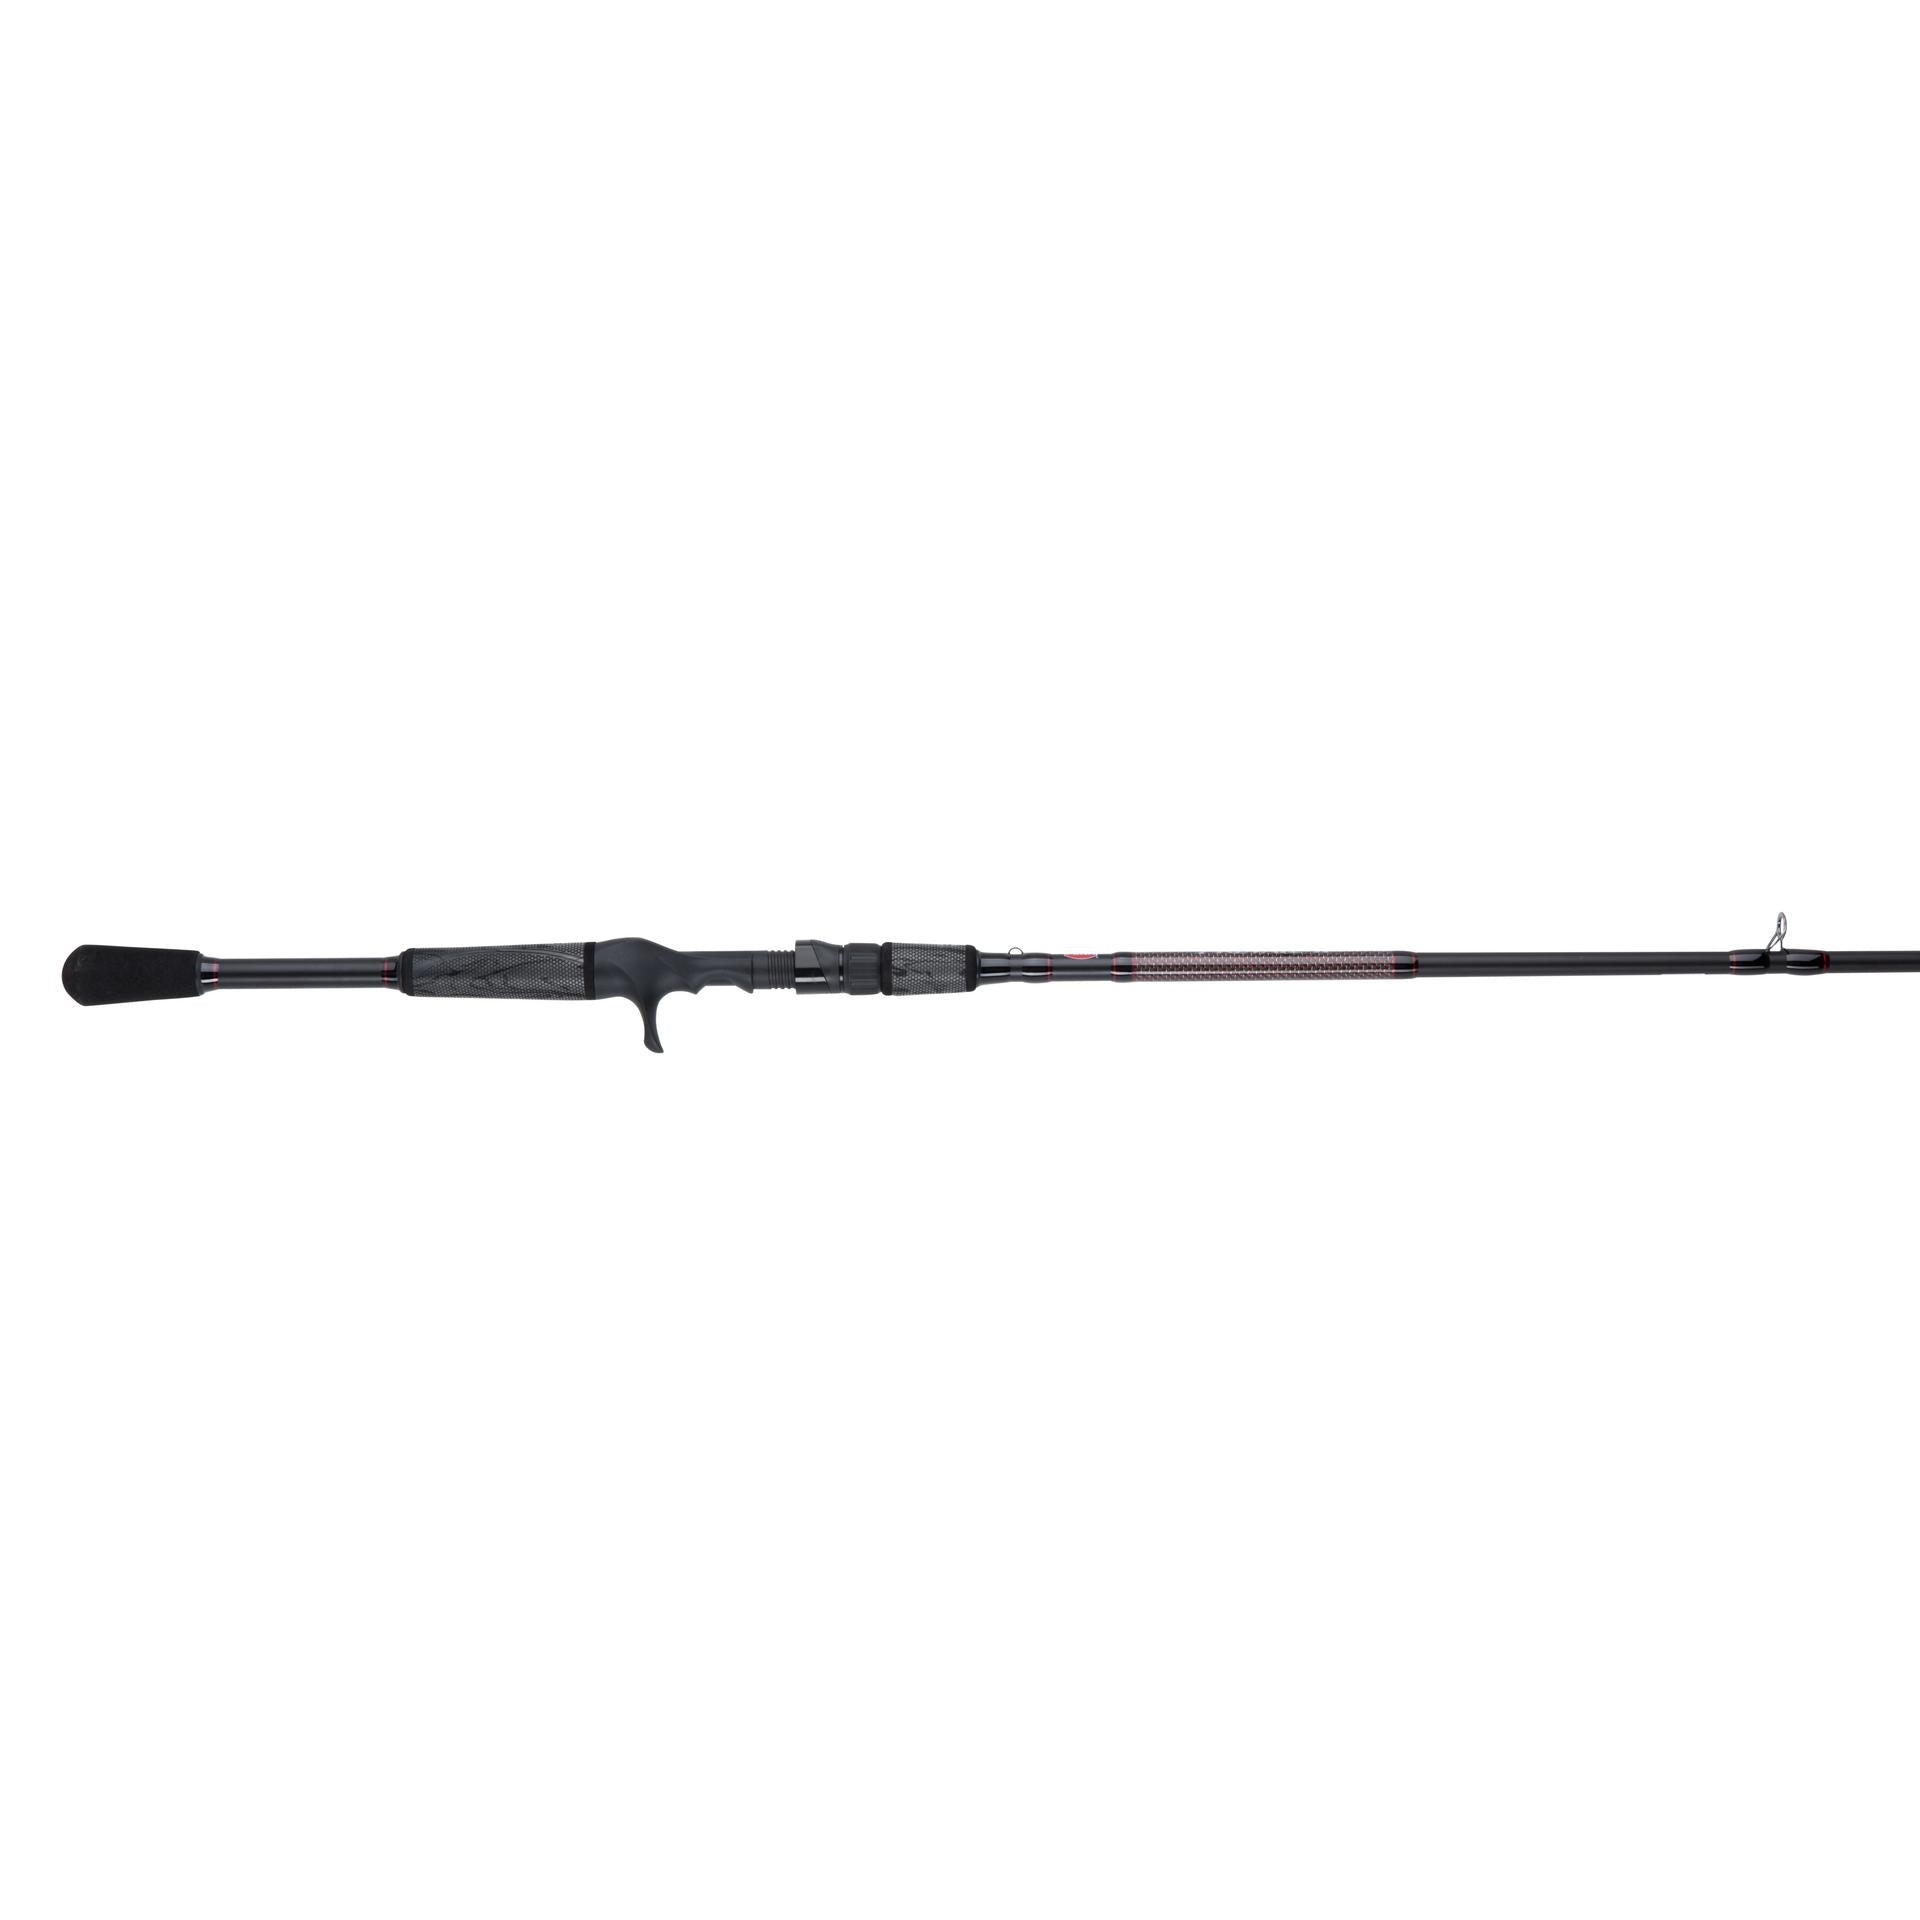 Prevail® II Inshore Casting Rod